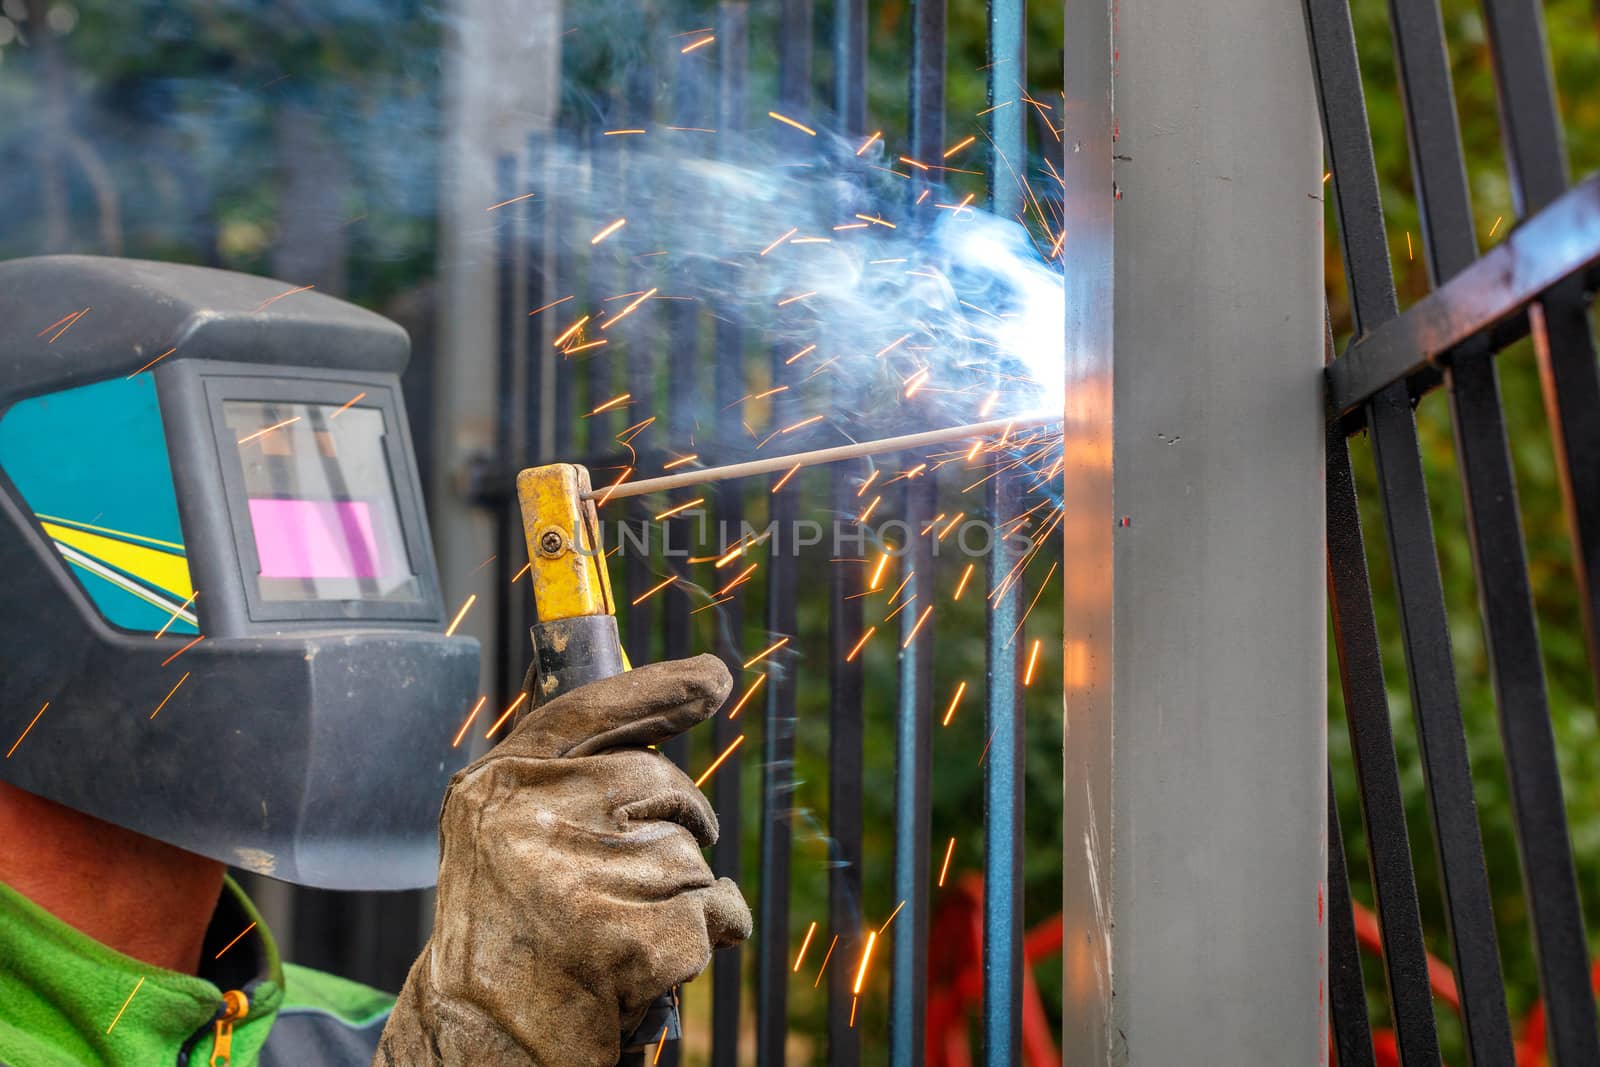 A welder in a protective helmet and gloves using an electrode welds a metal fence in a park area, bright sparks, blue smoke fly, selective focus, copy space.